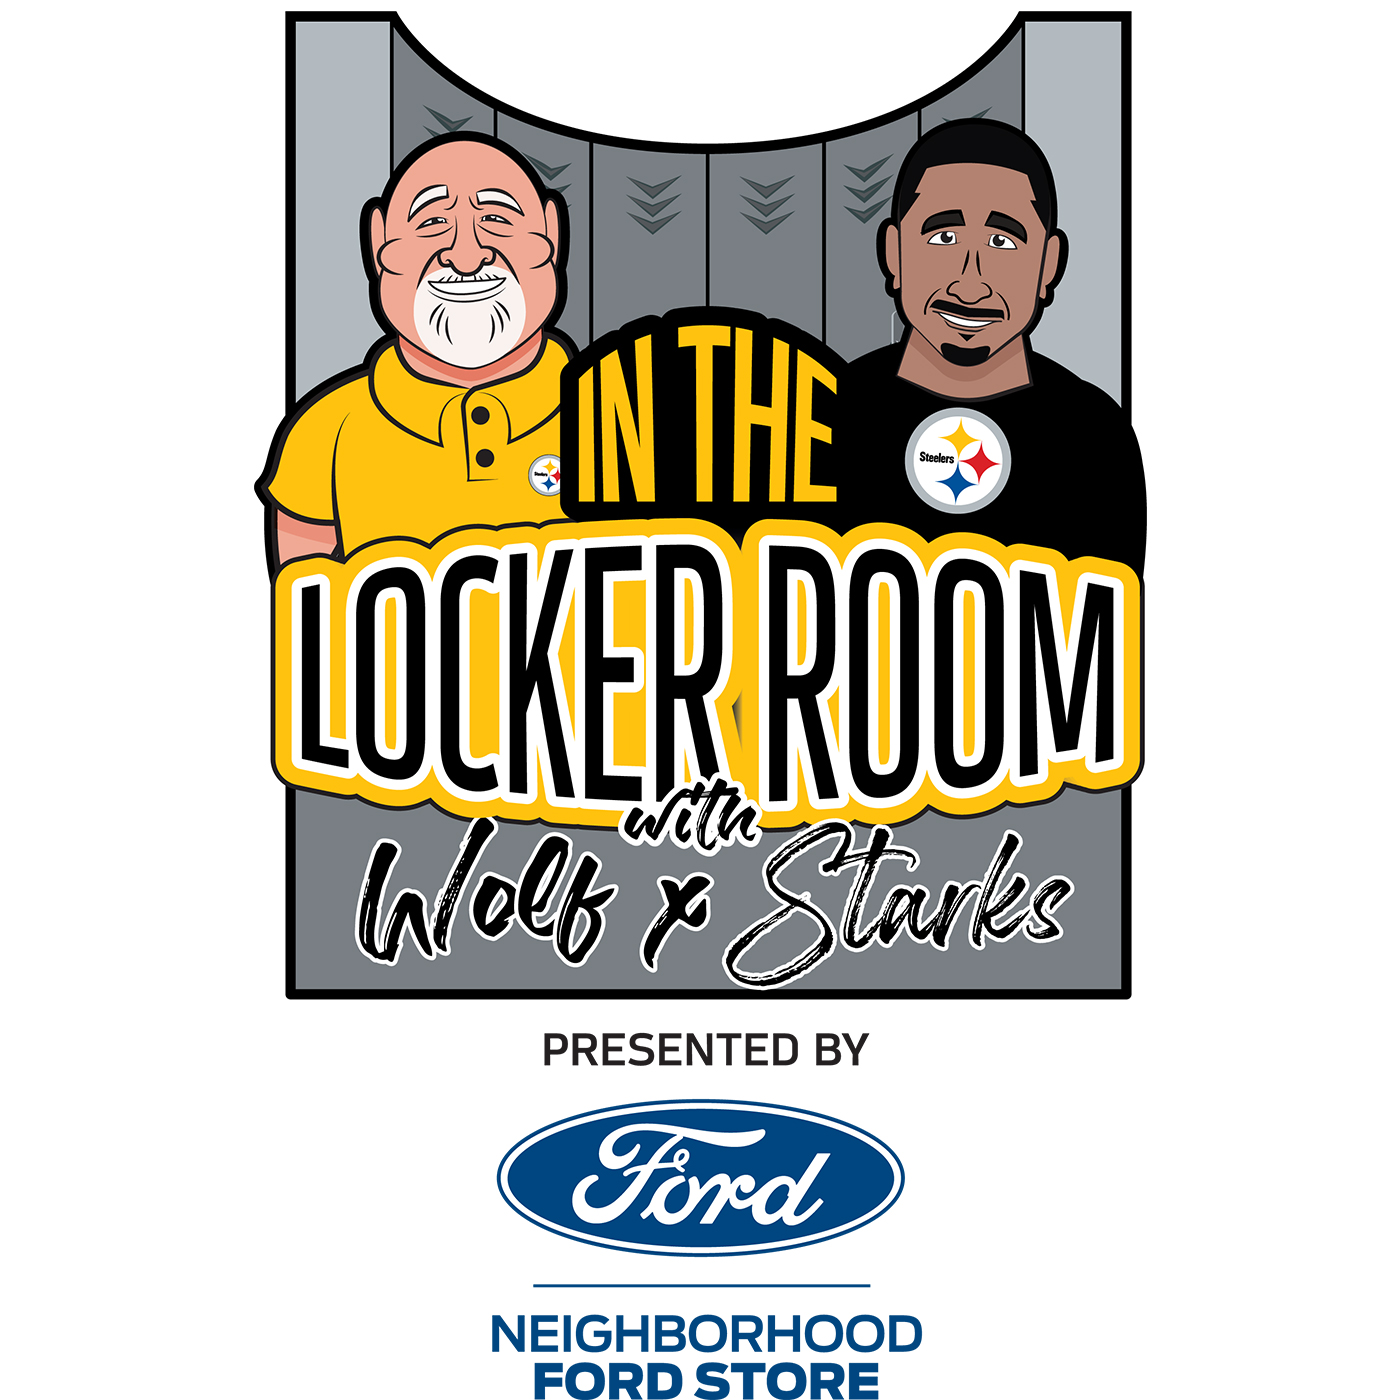 In the Locker Room with Tunch and Wolf - Oct. 3, 2019